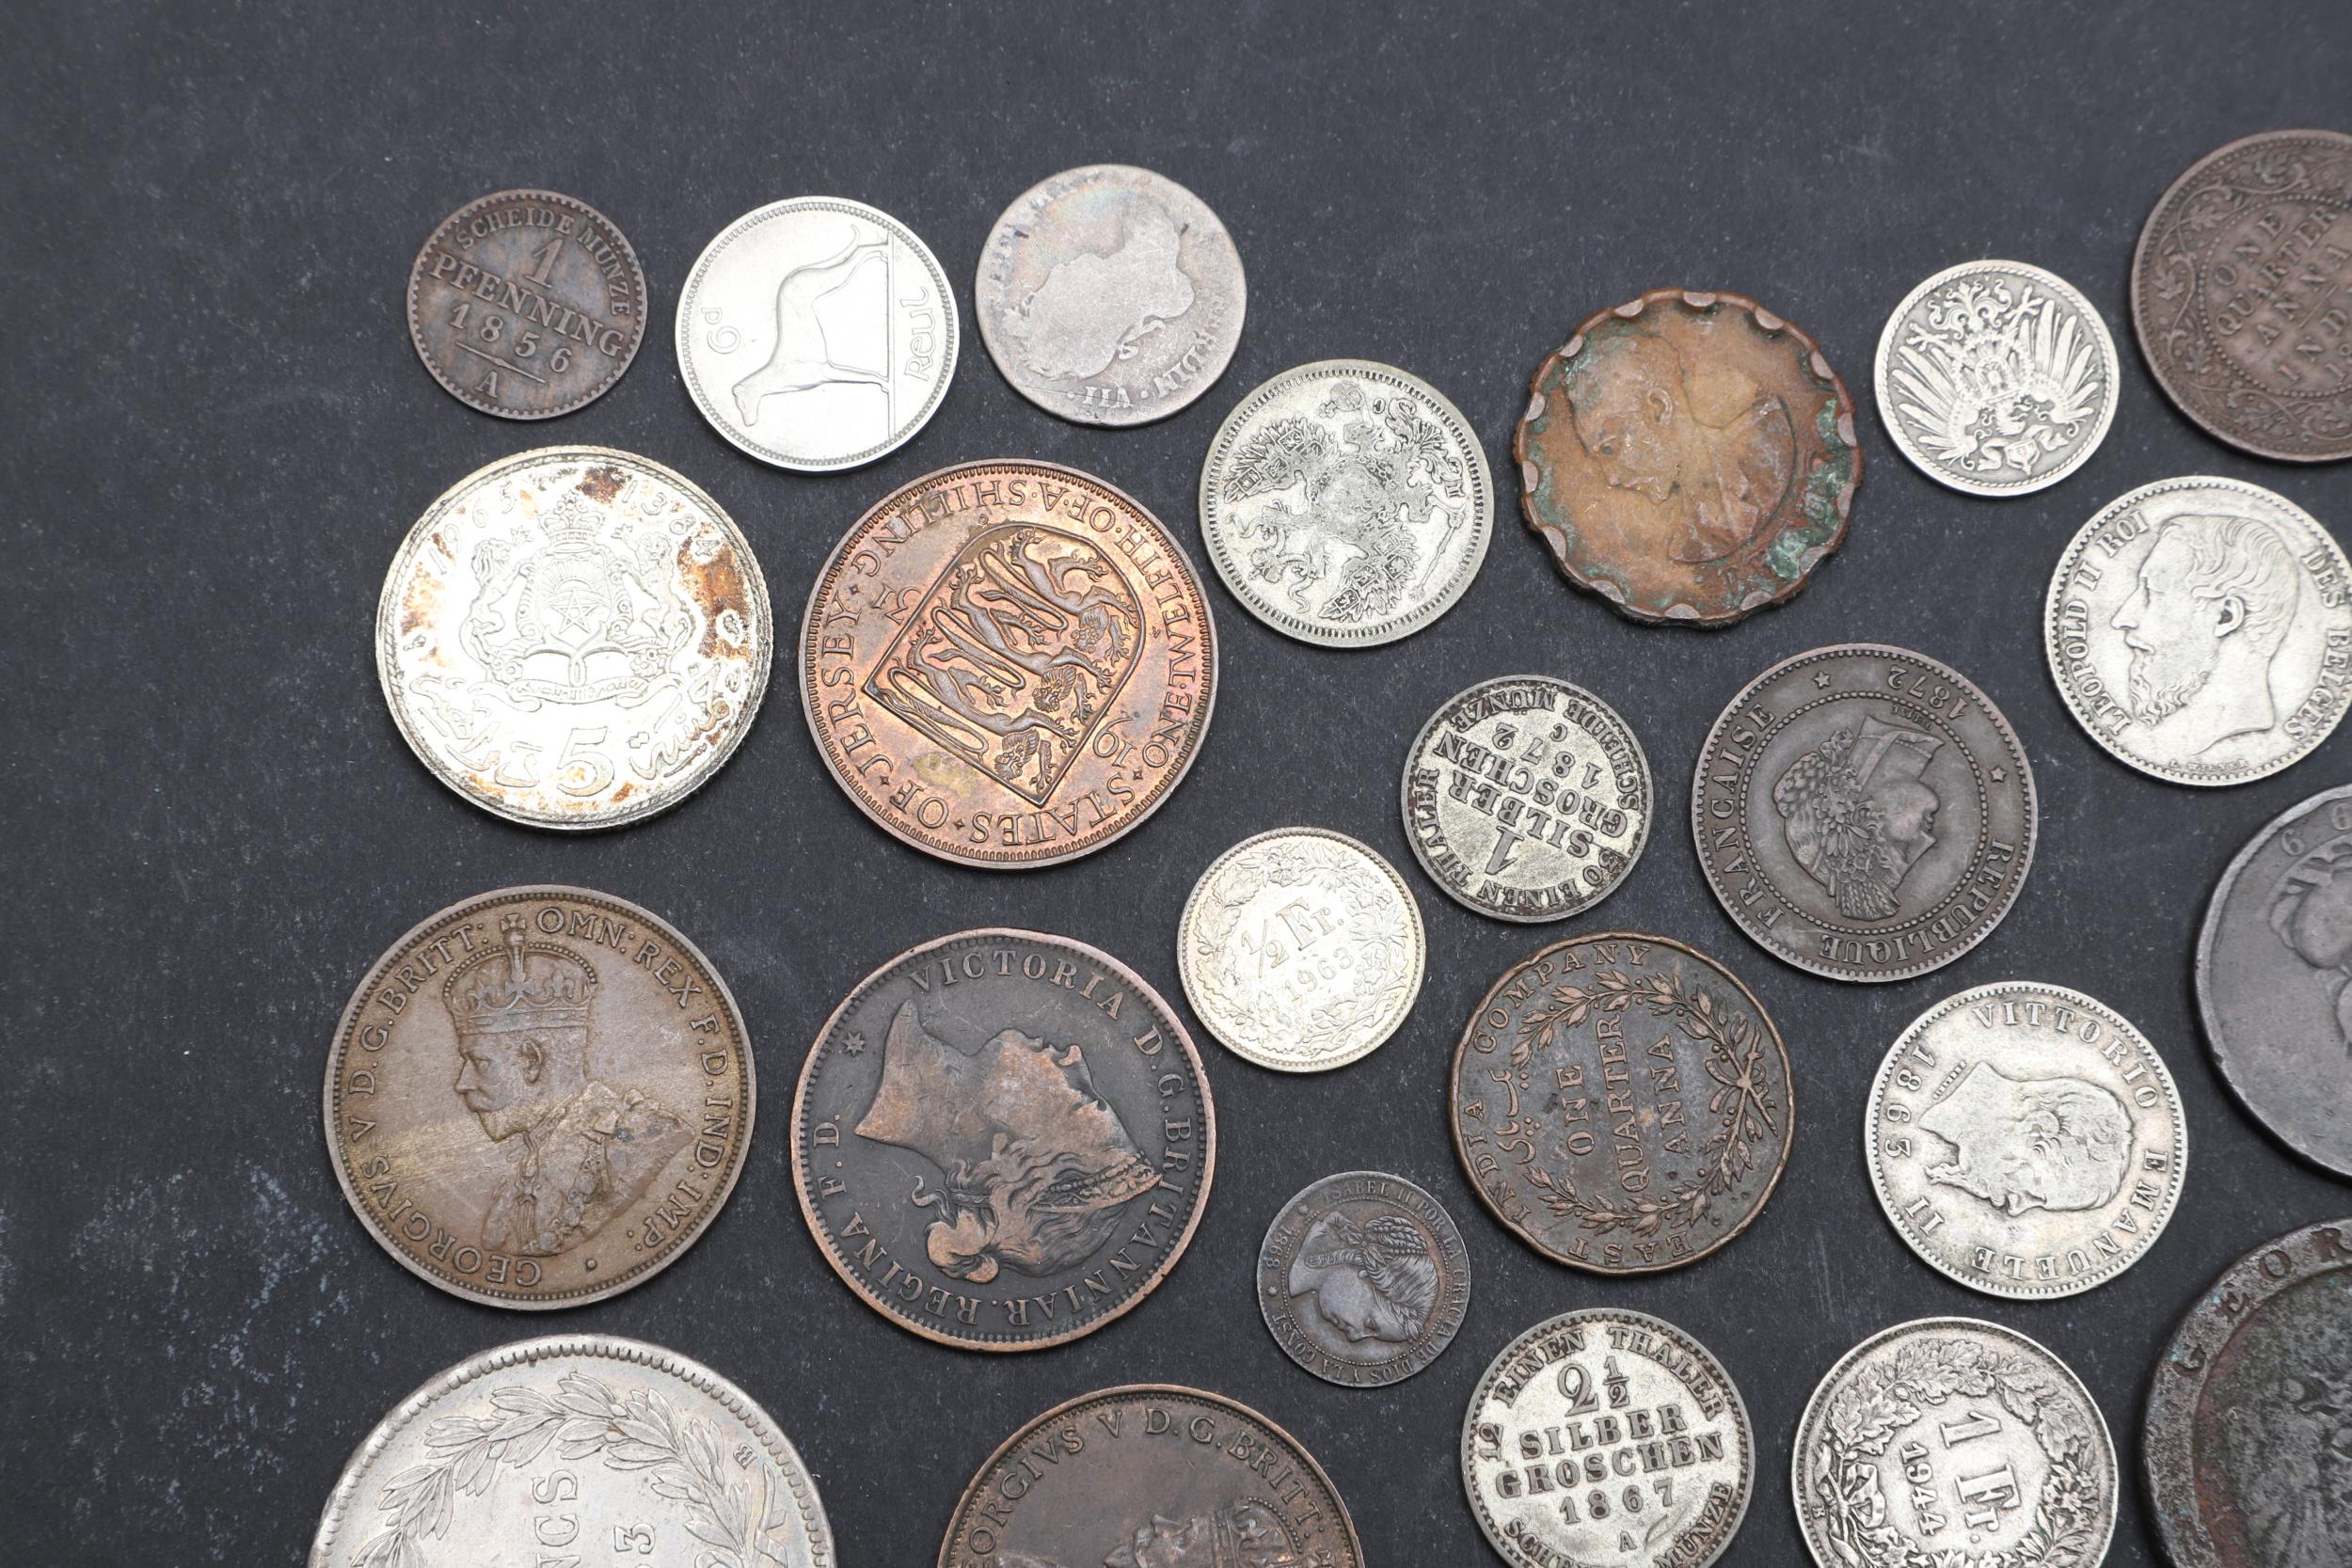 A COLLECTION OF WORLD COINS INCLUDING A NAPOLEON III 5 FRANC COIN. - Image 2 of 5